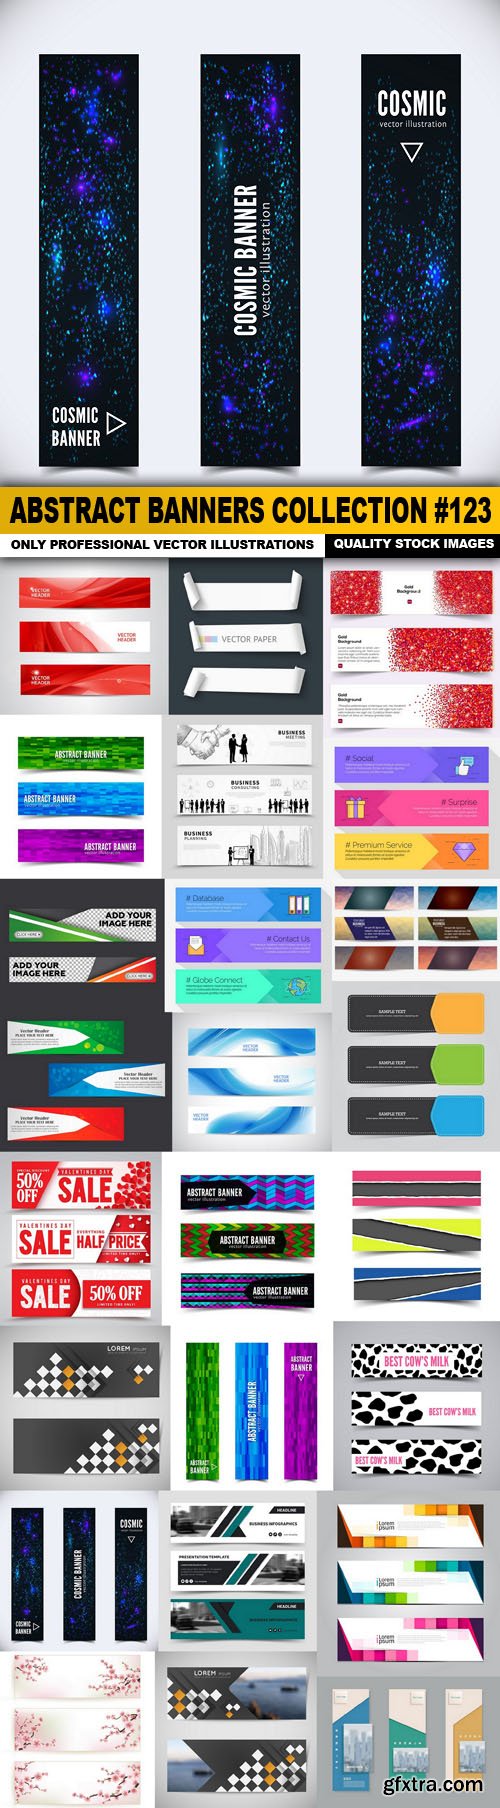 Abstract Banners Collection #123 - 24 Vectors